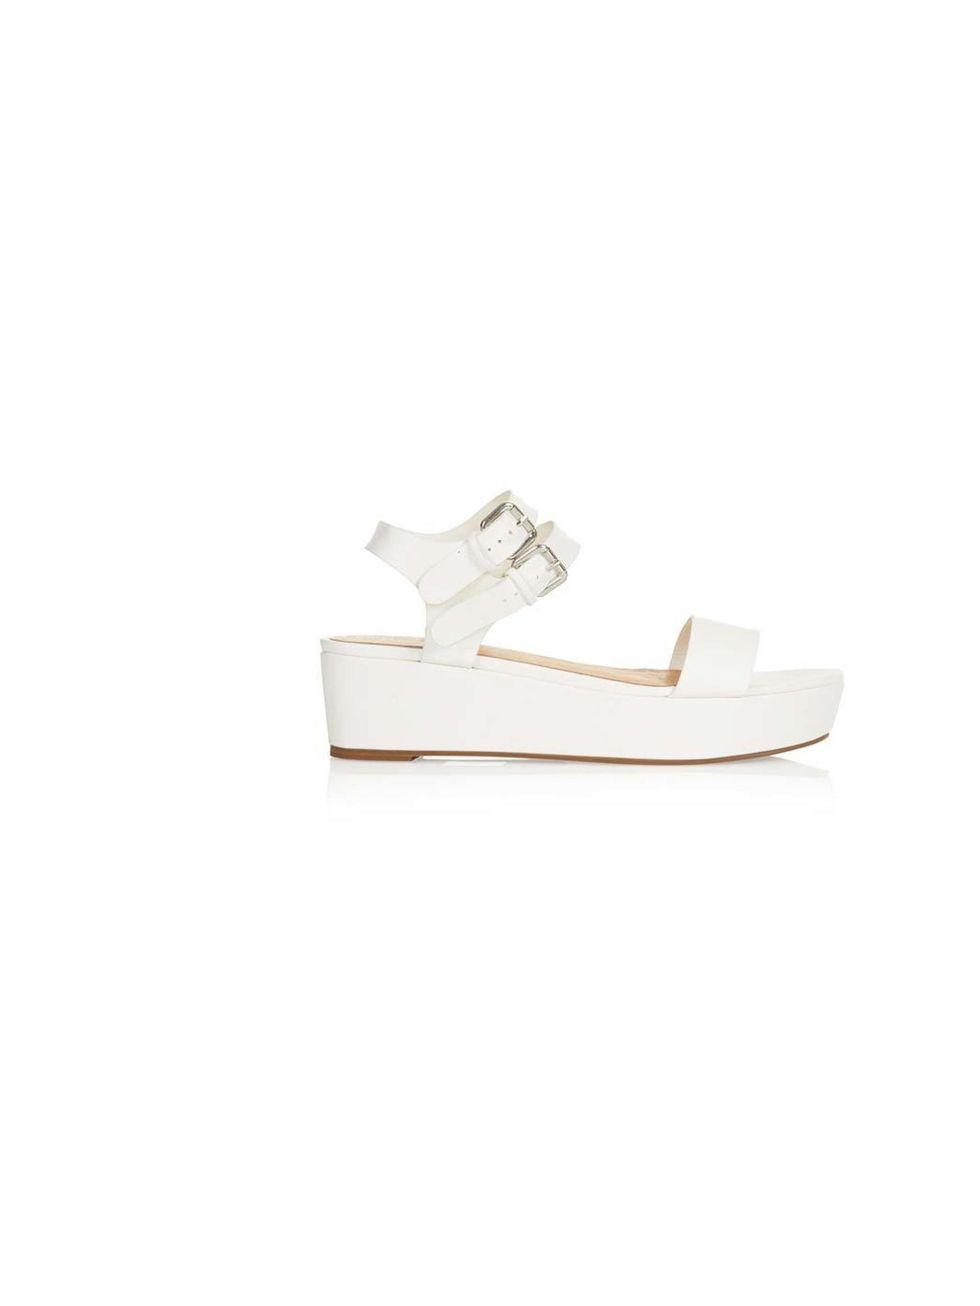 <p>The flatform sandal has turned out to be the shoe of the summer - we love this minimalist white pair.</p><p><a href="http://www.topshop.com/en/tsuk/product/shoes-430/flats-459/hanna-flatform-sandals-1841081?bi=1&ps=200">Topshop</a> shoes, £32</p>